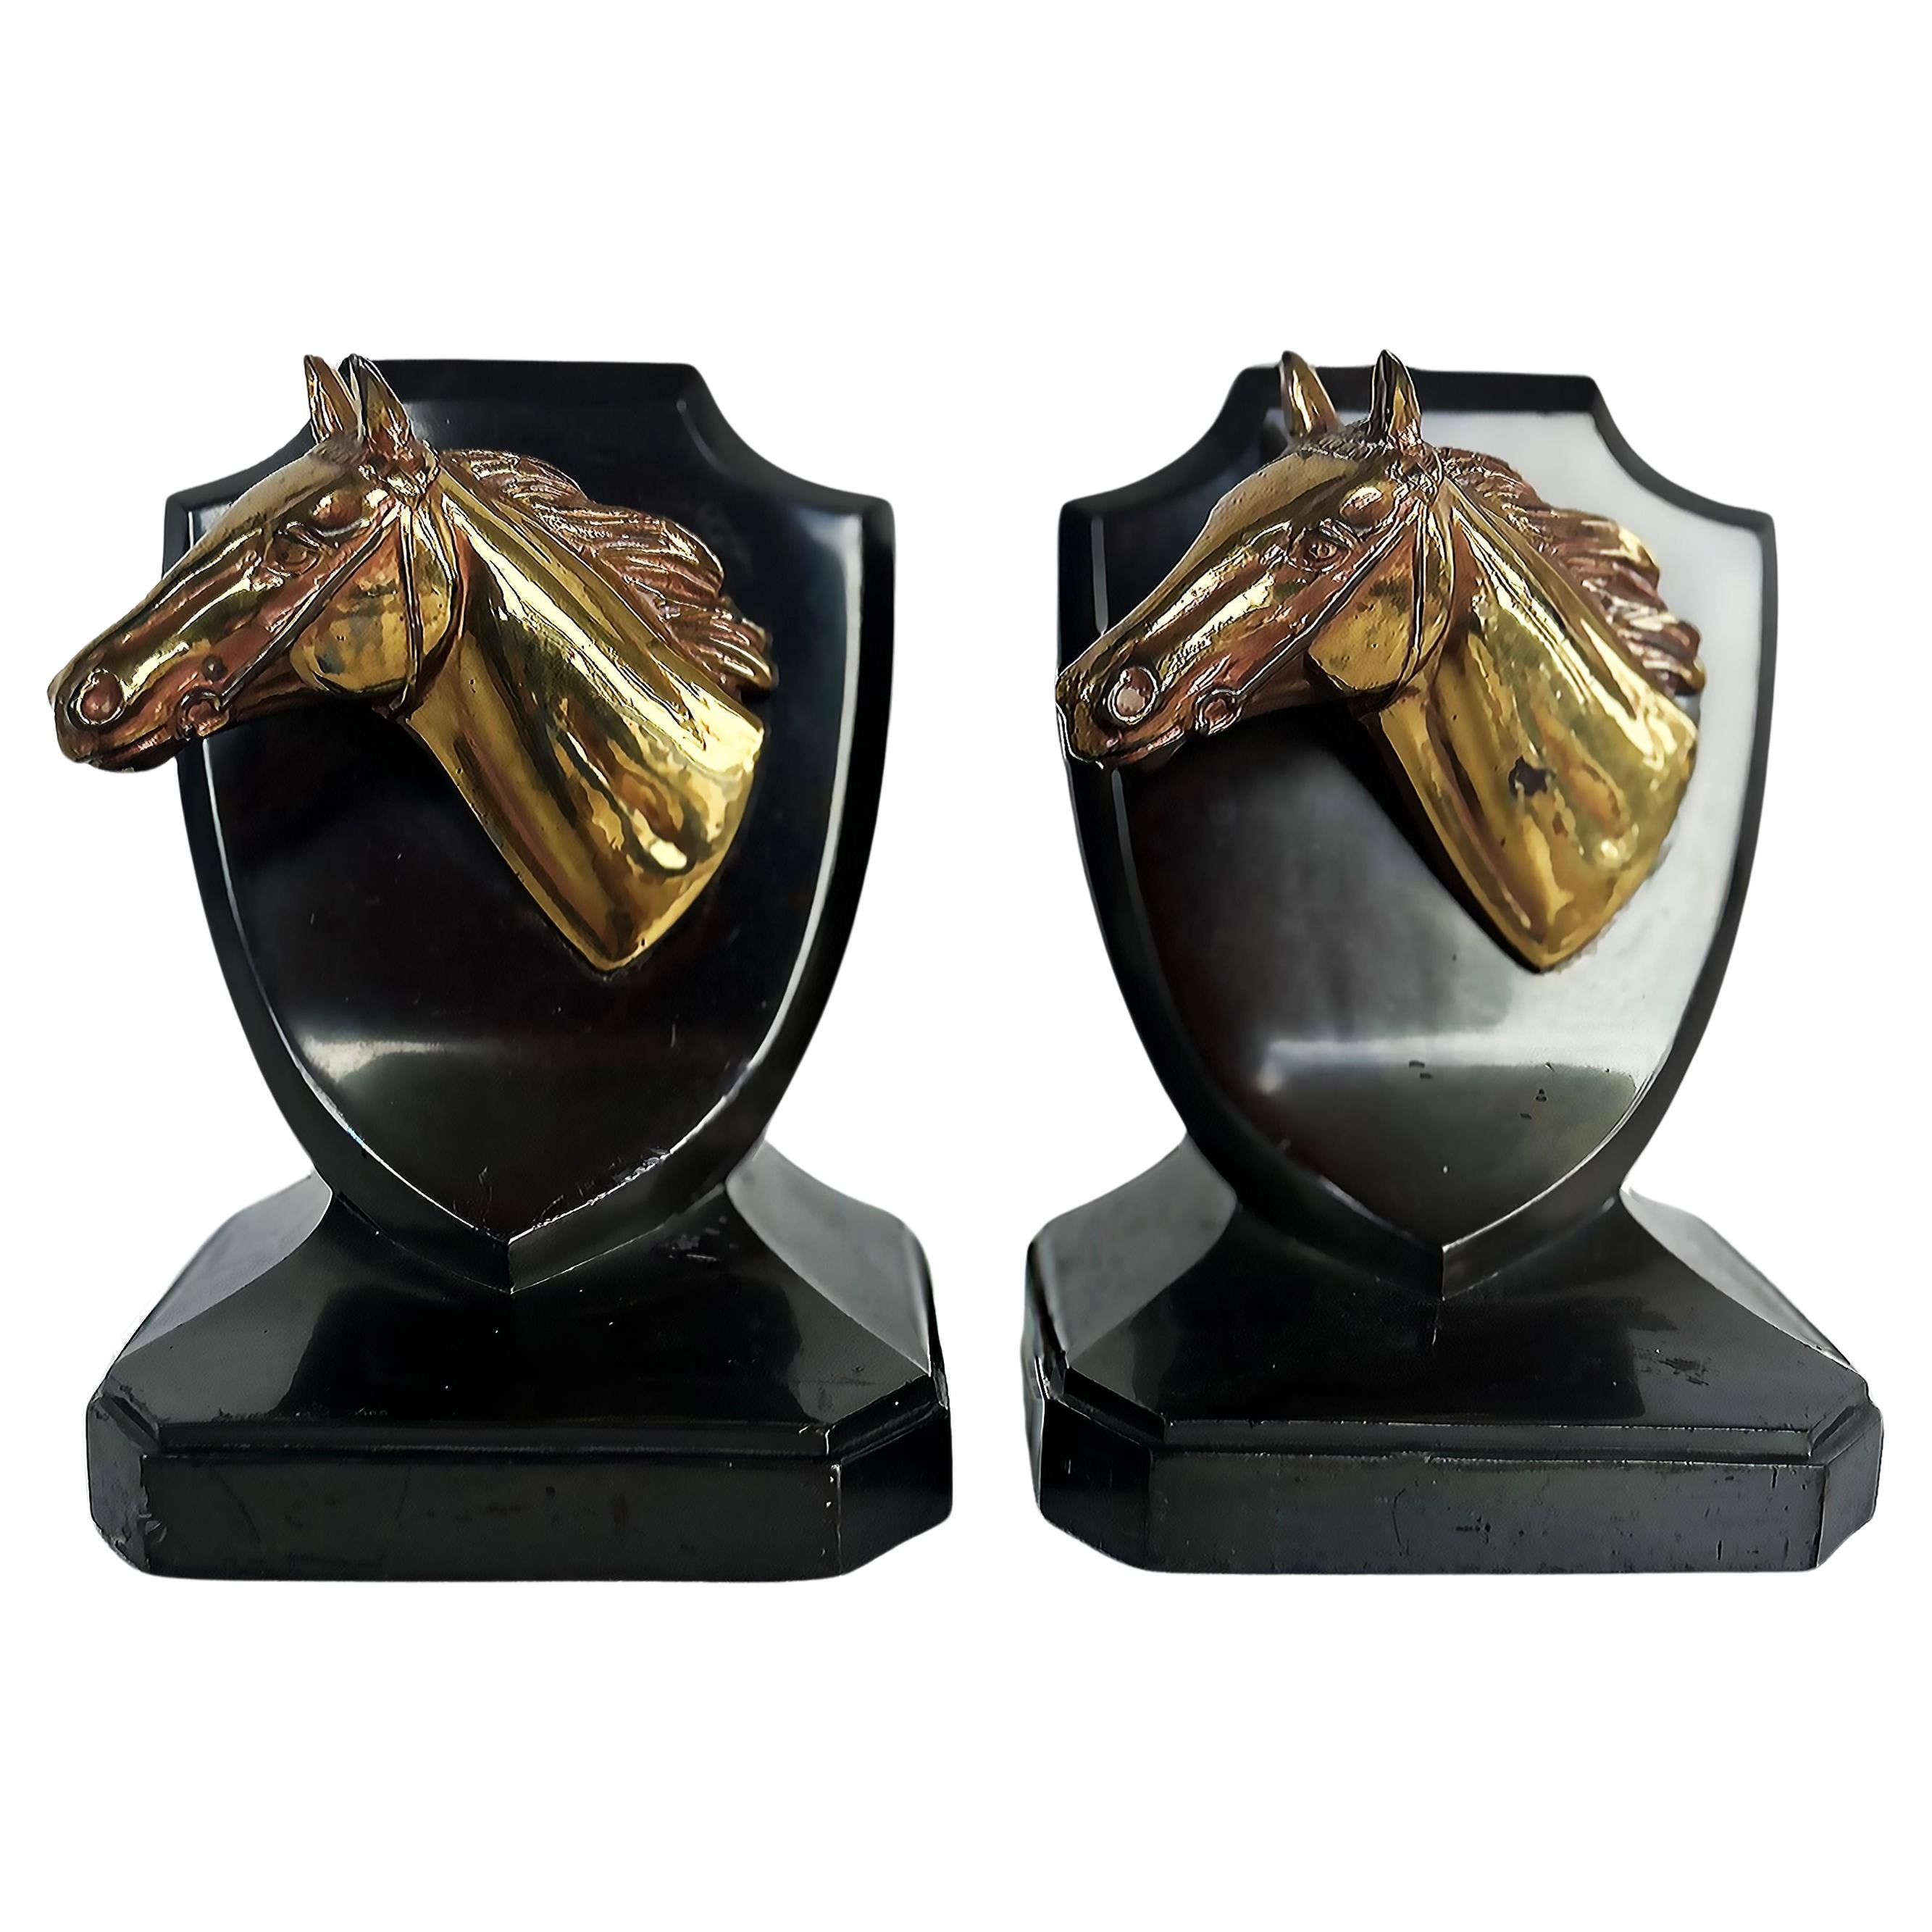 Vintage Equestrian Horse Iron, Brass Trophy Bookends Stamped P.M.C, Pair (Paire)